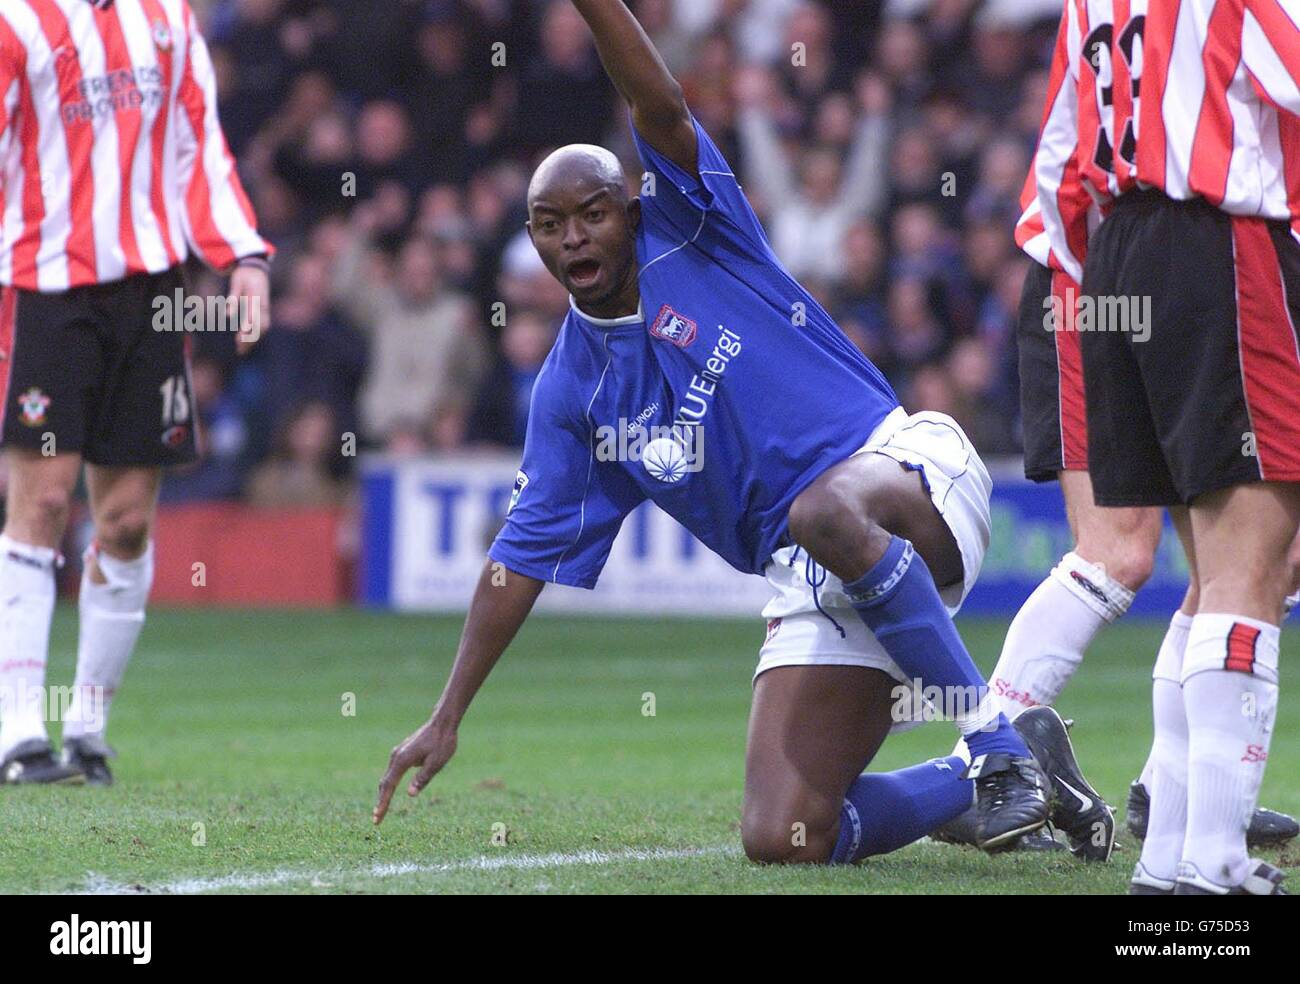 Finidi George celebrates scoring the for Ipswich Town in his side's 3-1 defeat to Southampton in the FA Barclaycard Premiership match at Ipswich's Portman Road ground. Stock Photo